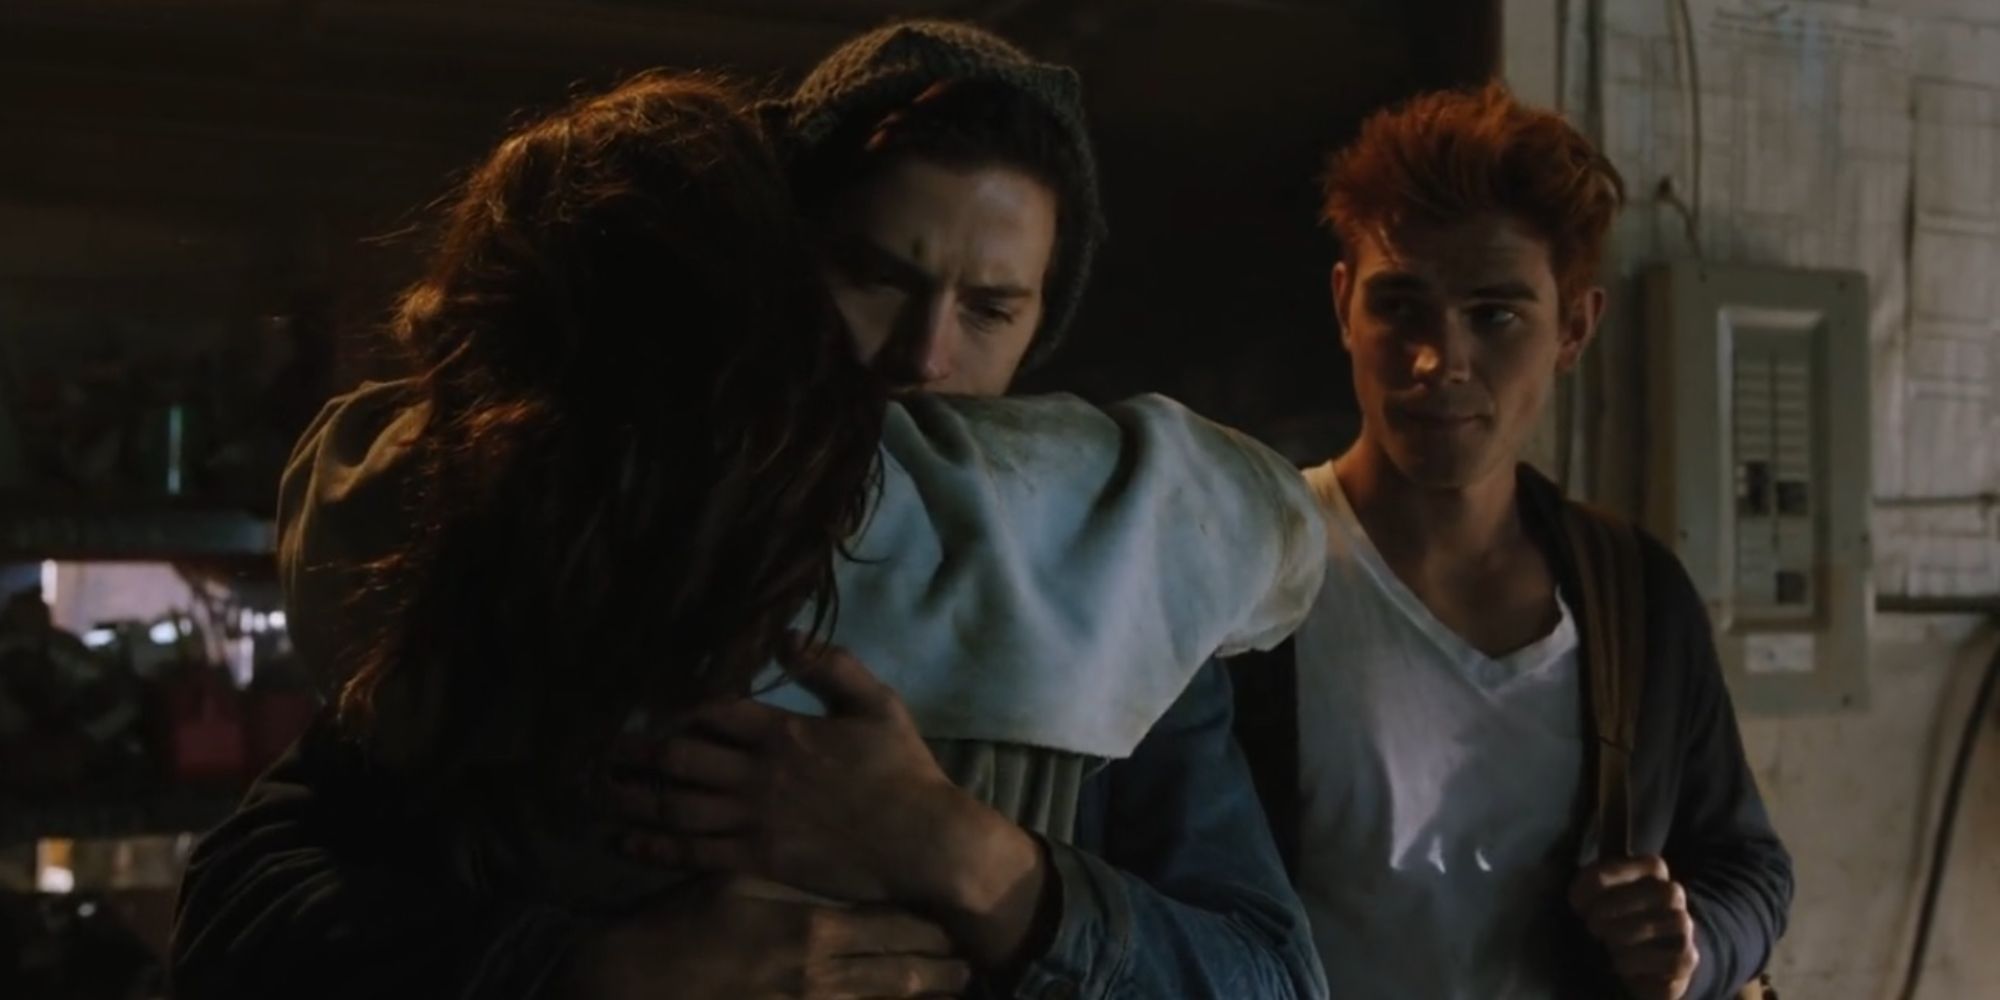 Archie watches as Jughead hugs his mother